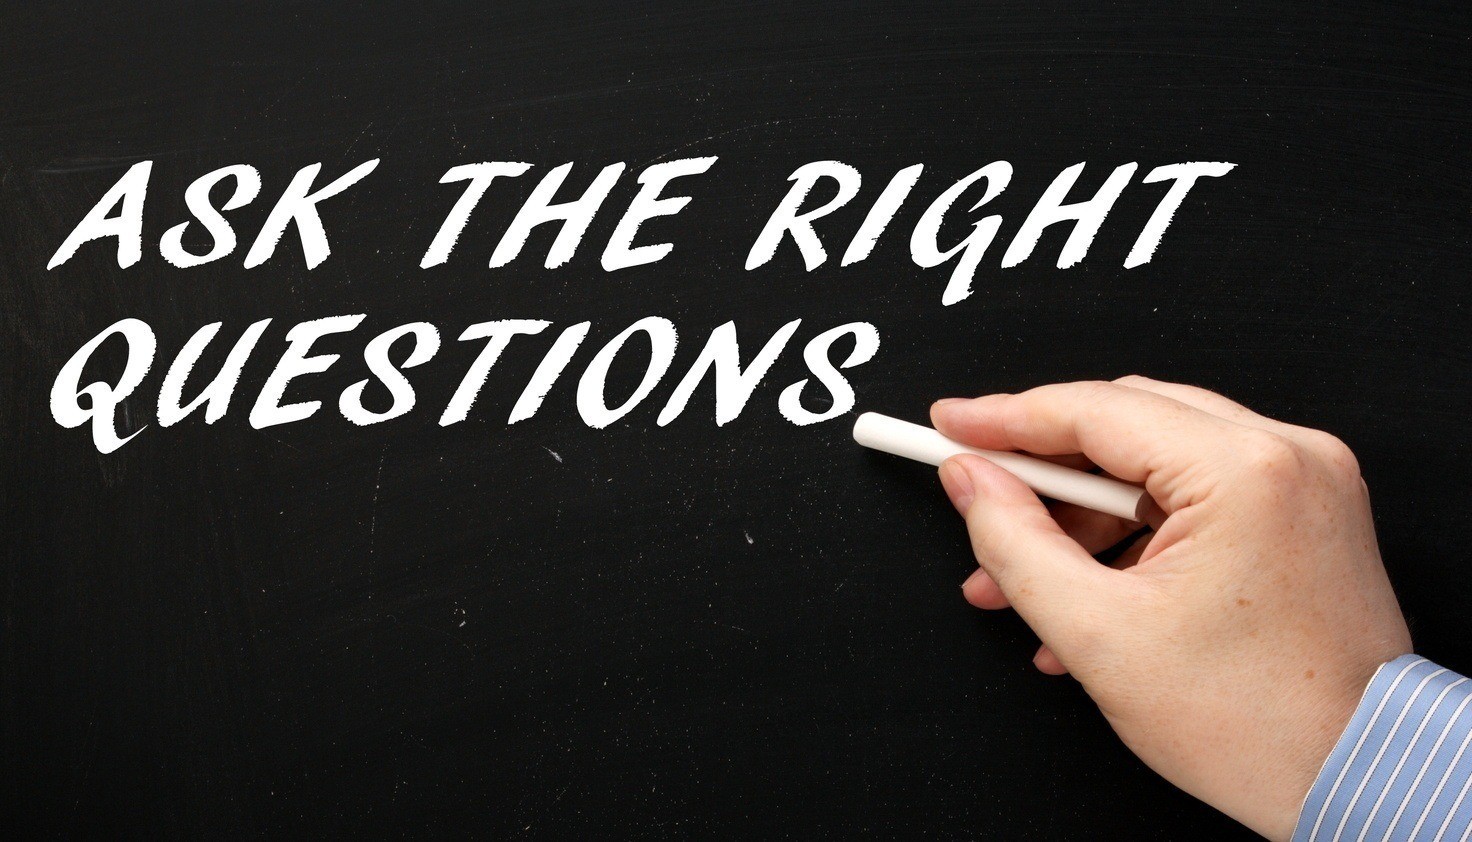 Questions to ask a Realtor